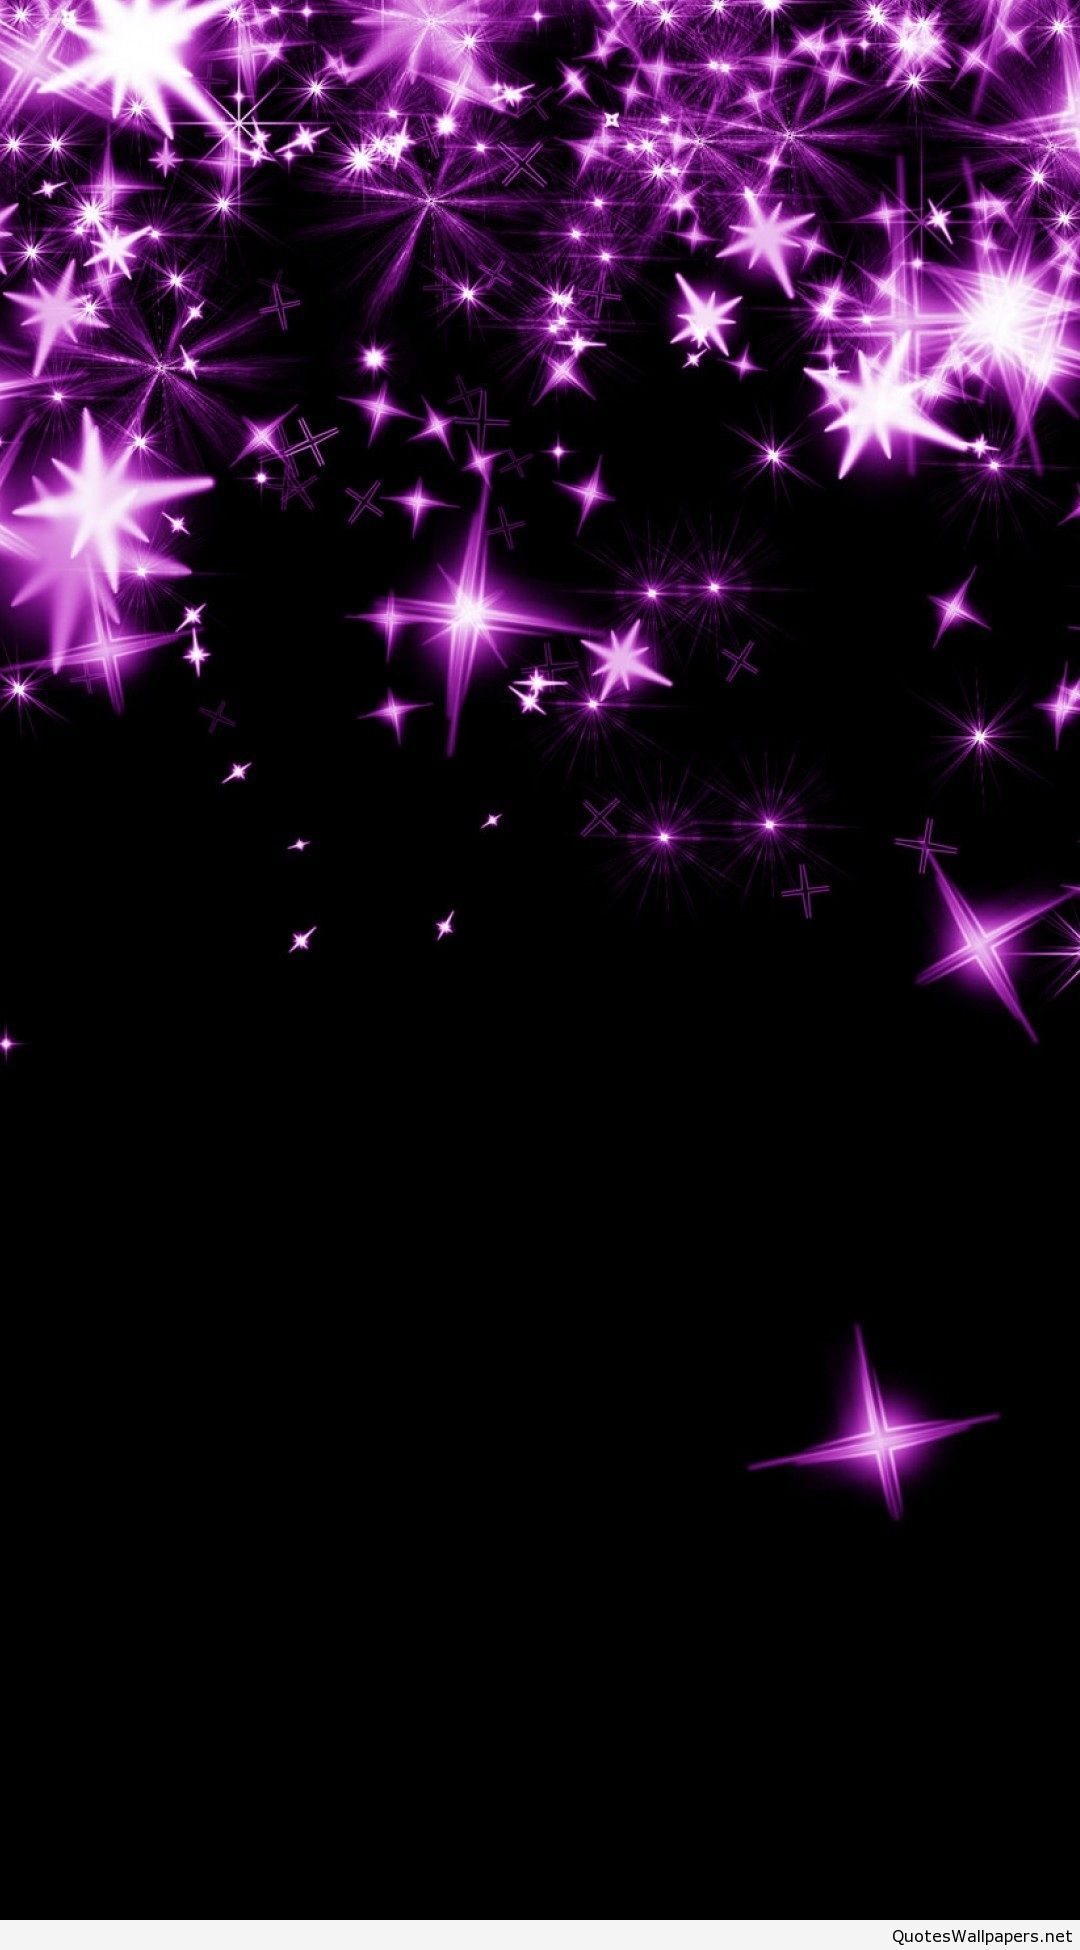 Best Nokia Mobile Wallpaper To Download - Black Background With Stars -  1080x1950 Wallpaper 